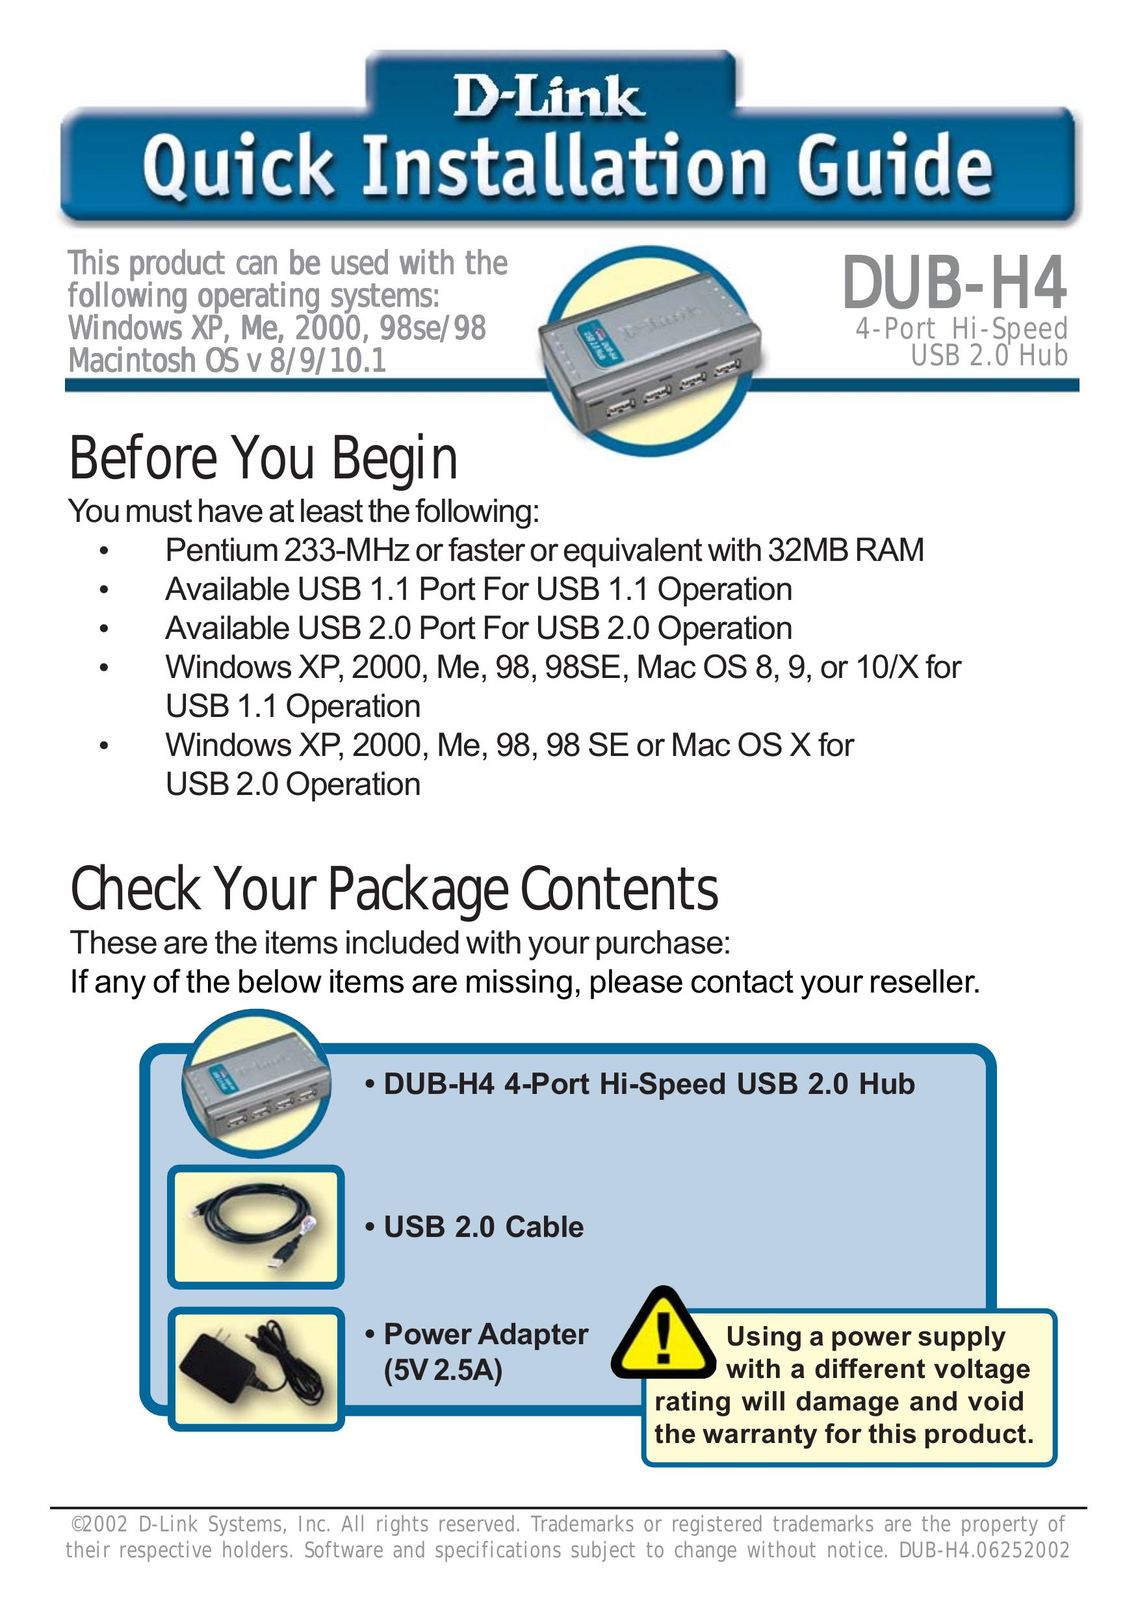 D-Link DUB-H4 Flat Panel Television User Manual